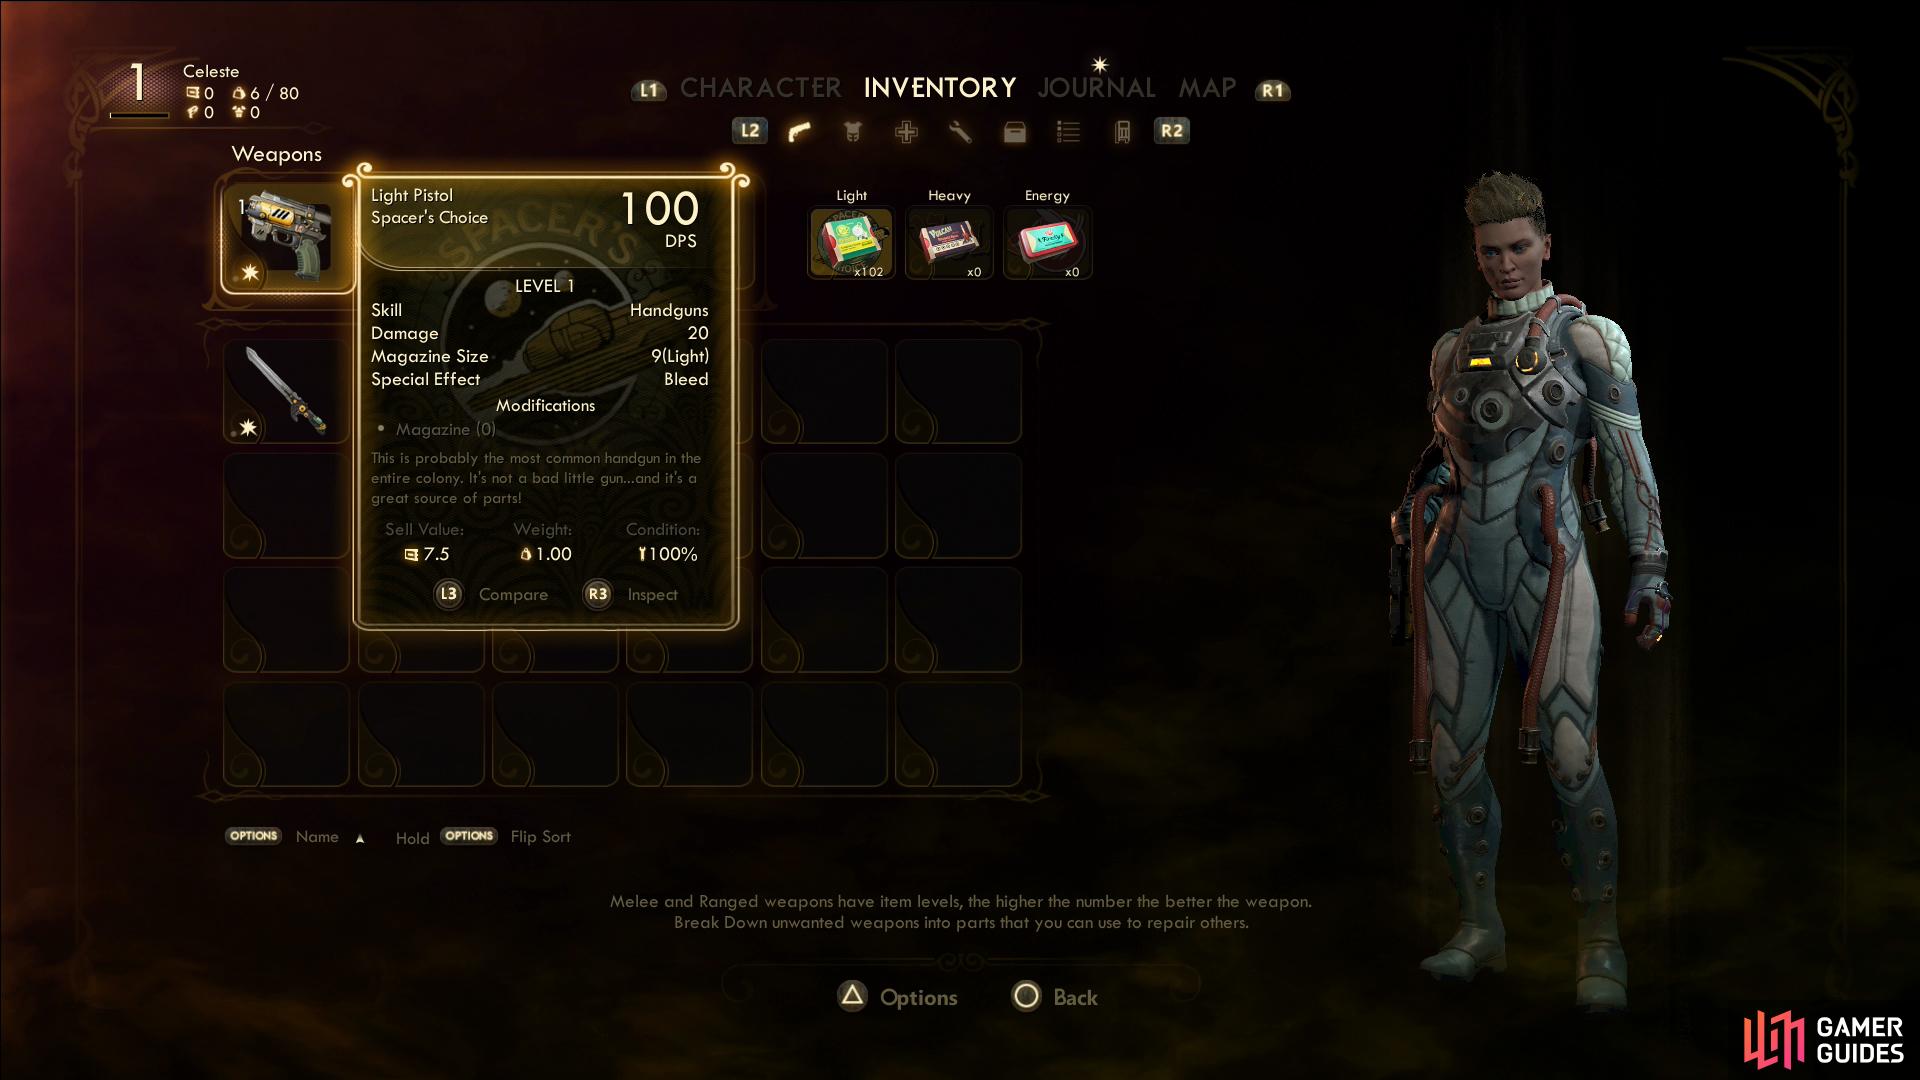 You can equip weapons and armor via your inventory menu.